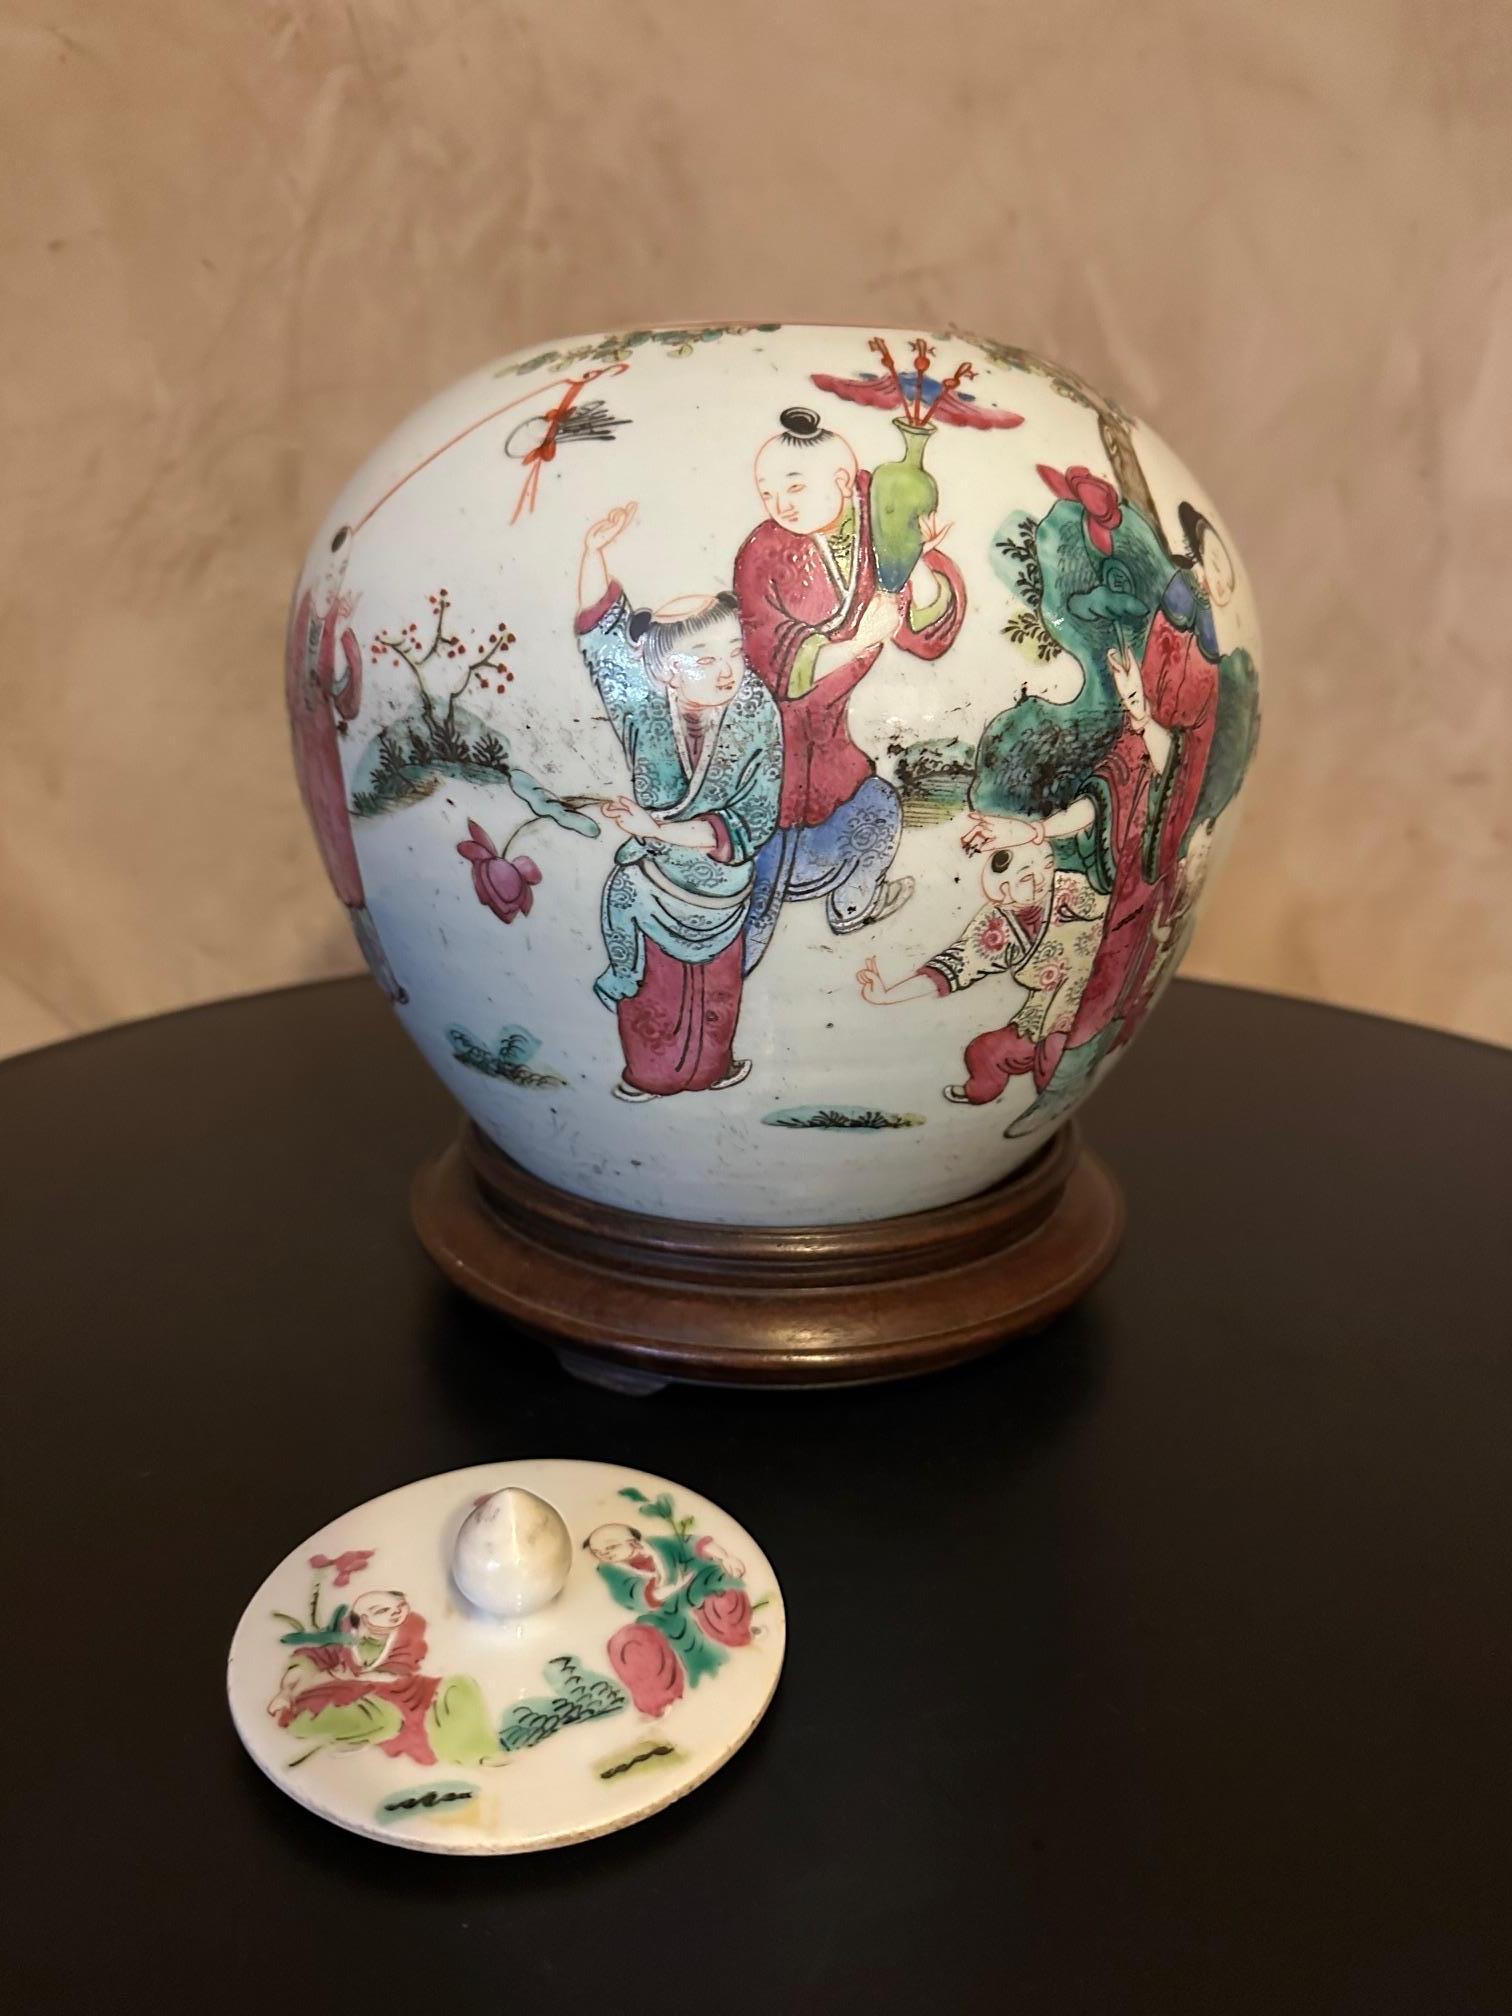 20th Century Early 20th century Chinese Porcelain Ginger Jar, 1900s